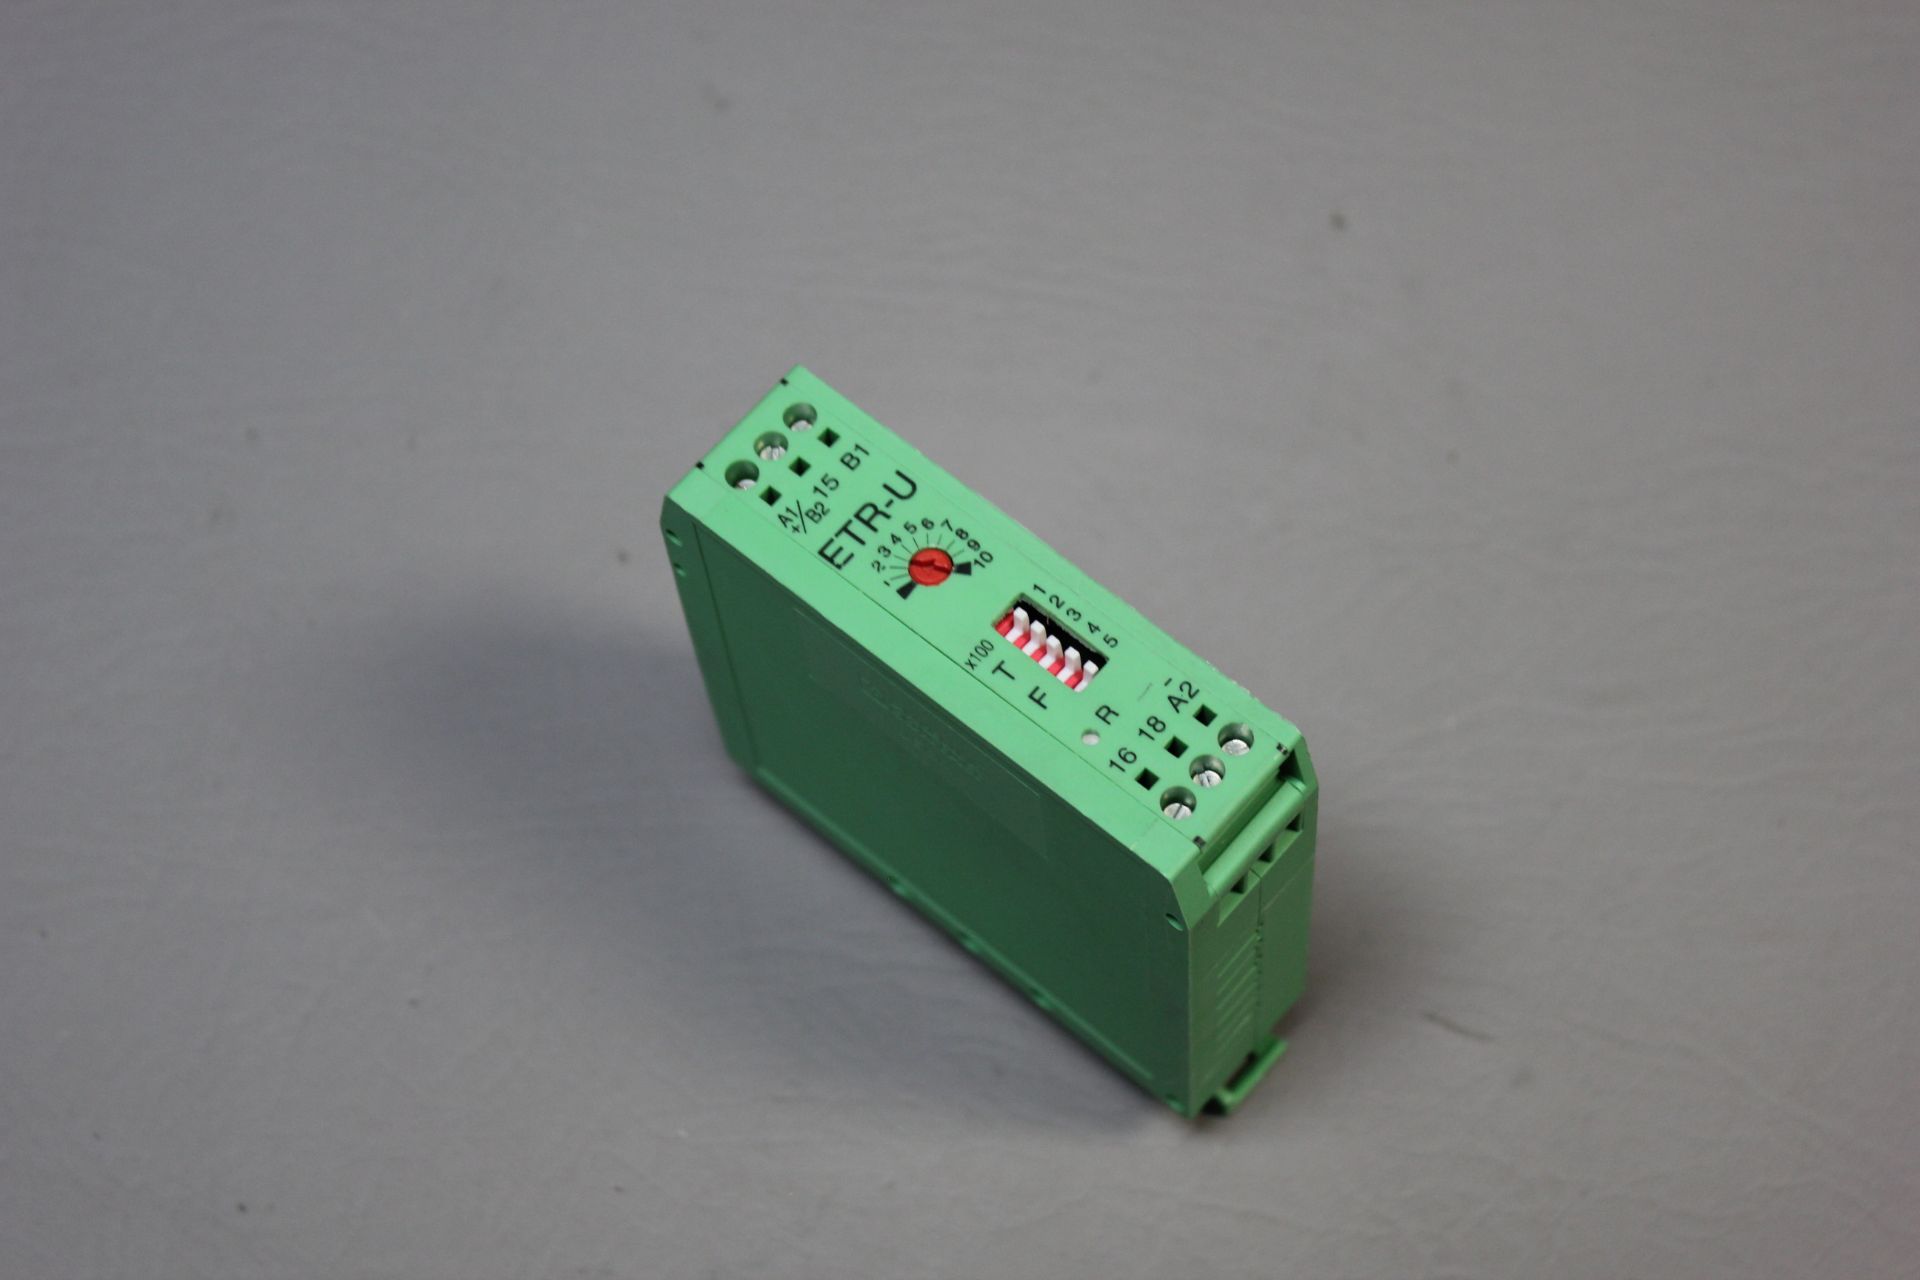 PHOENIX CONTACT MULTIFUNCTION TIMER RELAY